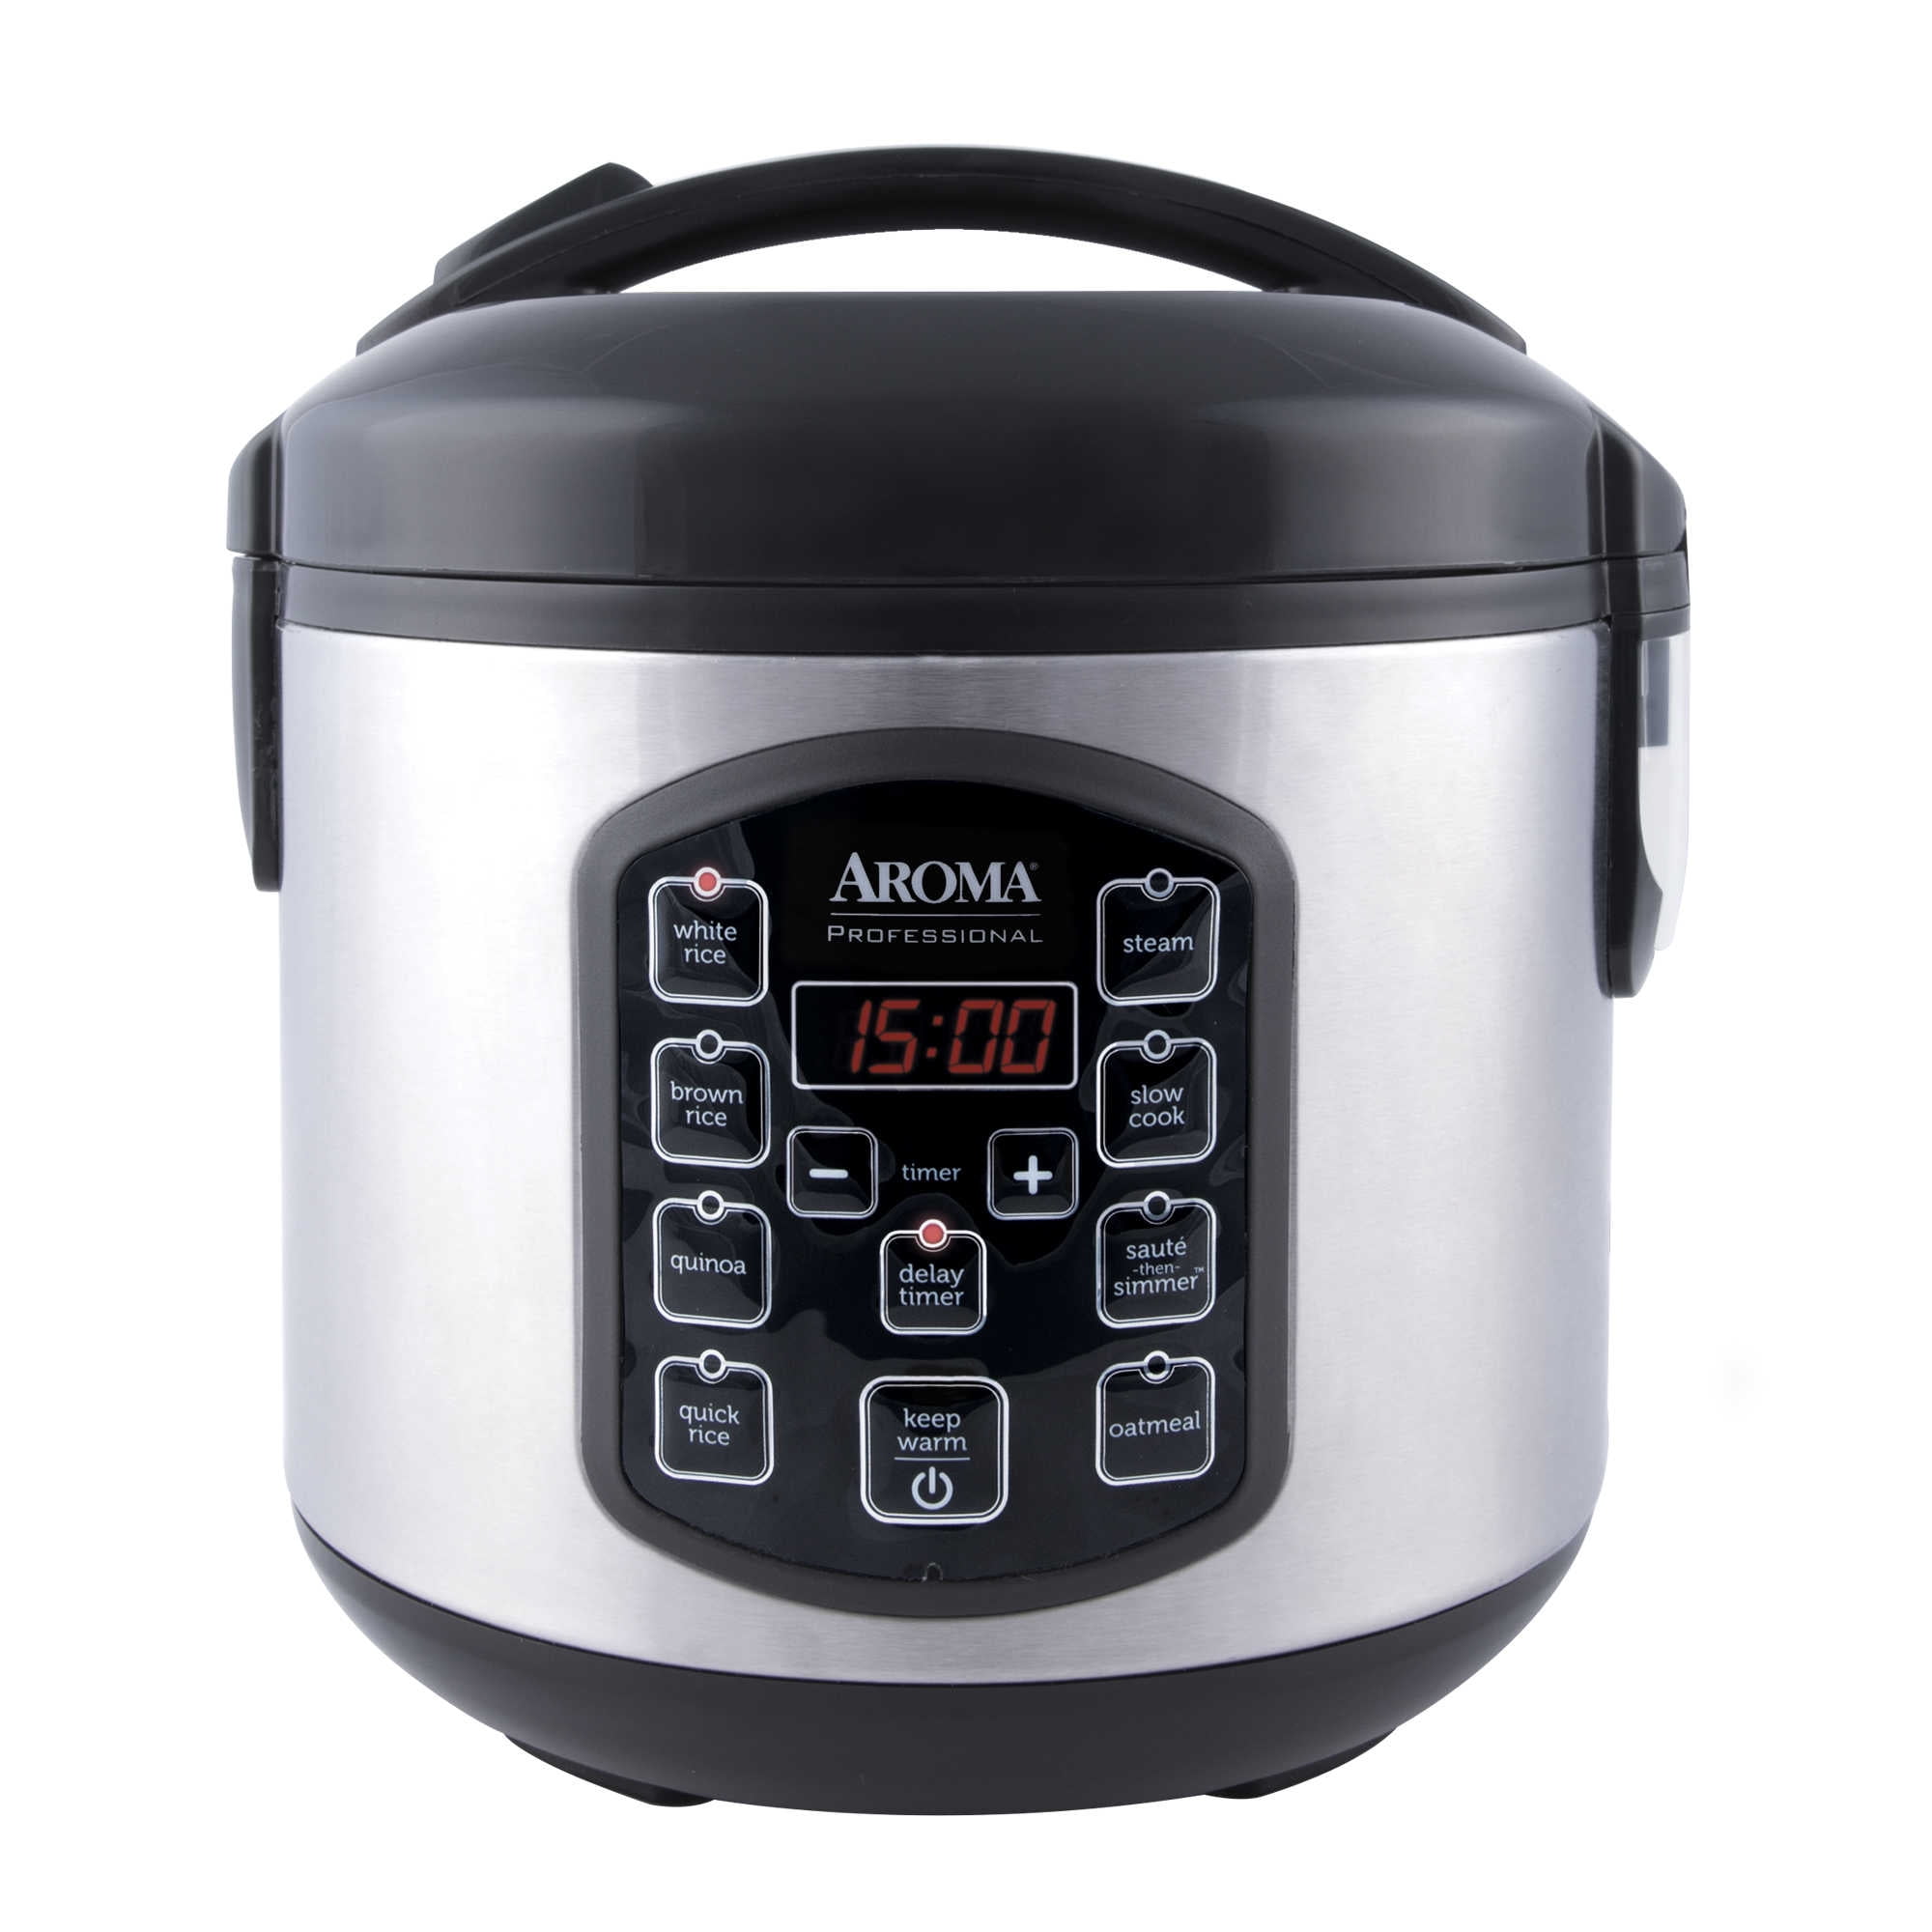 Tomo Multifunctional Rice Cooker functions 2.6 QT Capacity 24 HR